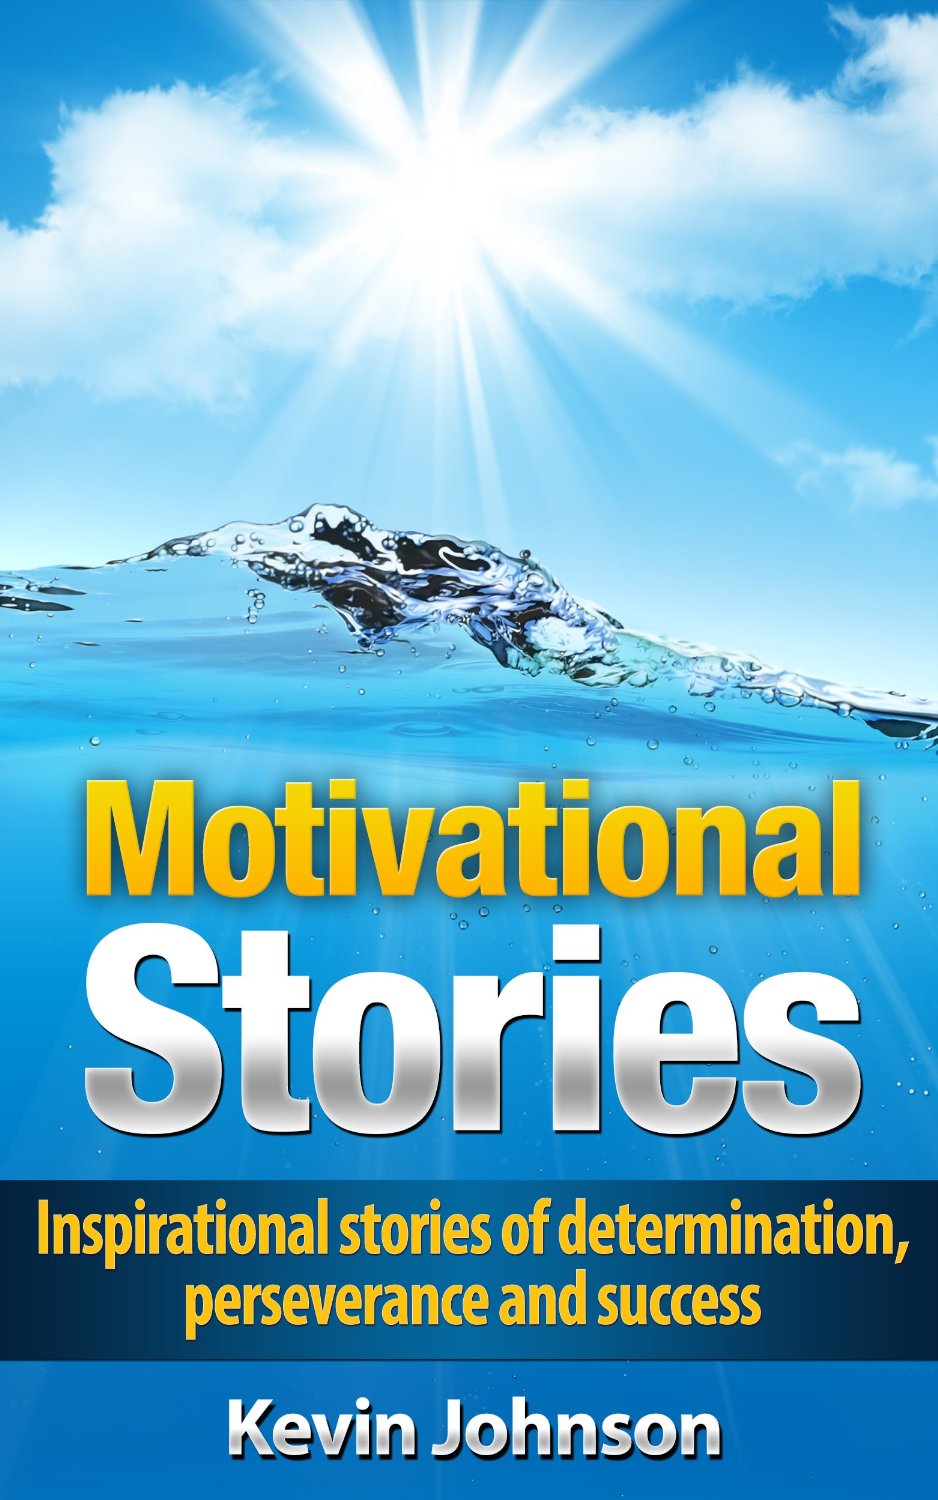 Motivational Stories by Kevin Johnson